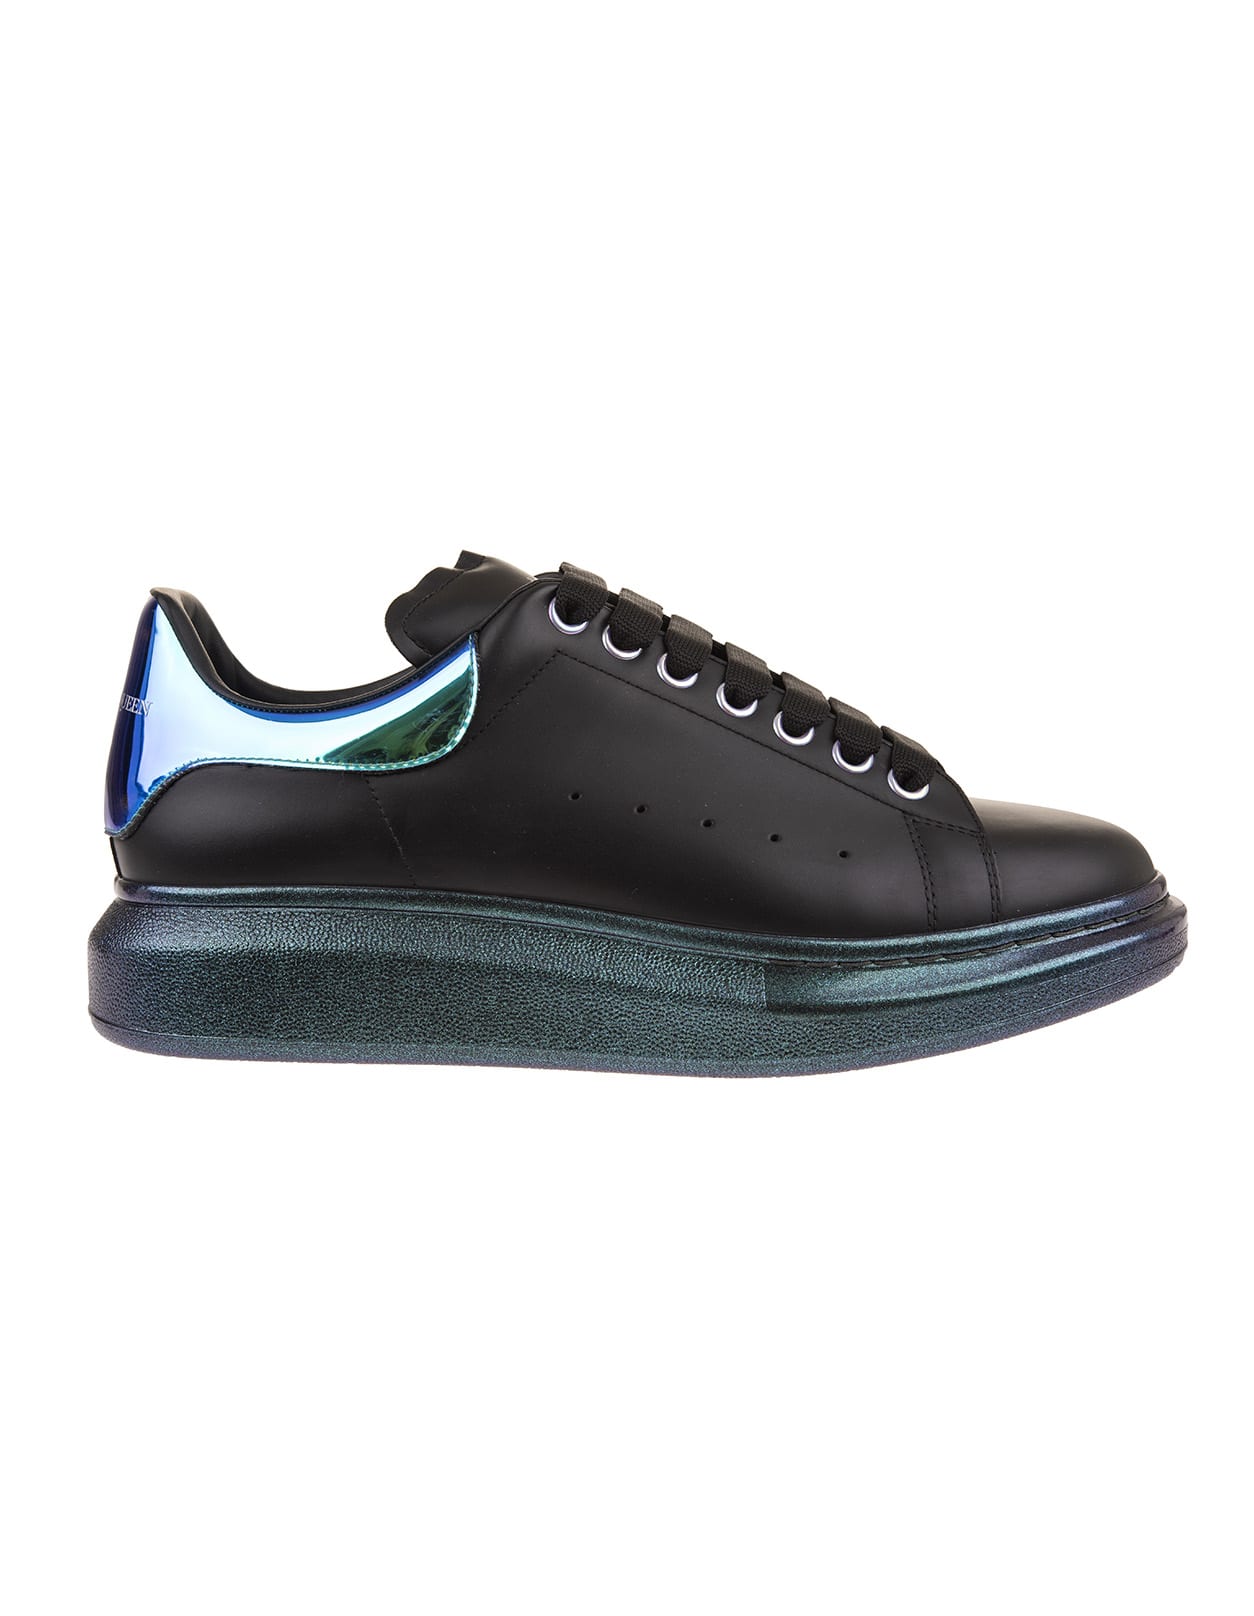 ALEXANDER MCQUEEN MAN BLACK OVERSIZE trainers WITH IRIDESCENT SPOILER AND BLUE SOLE,625168-WHYBA 1252